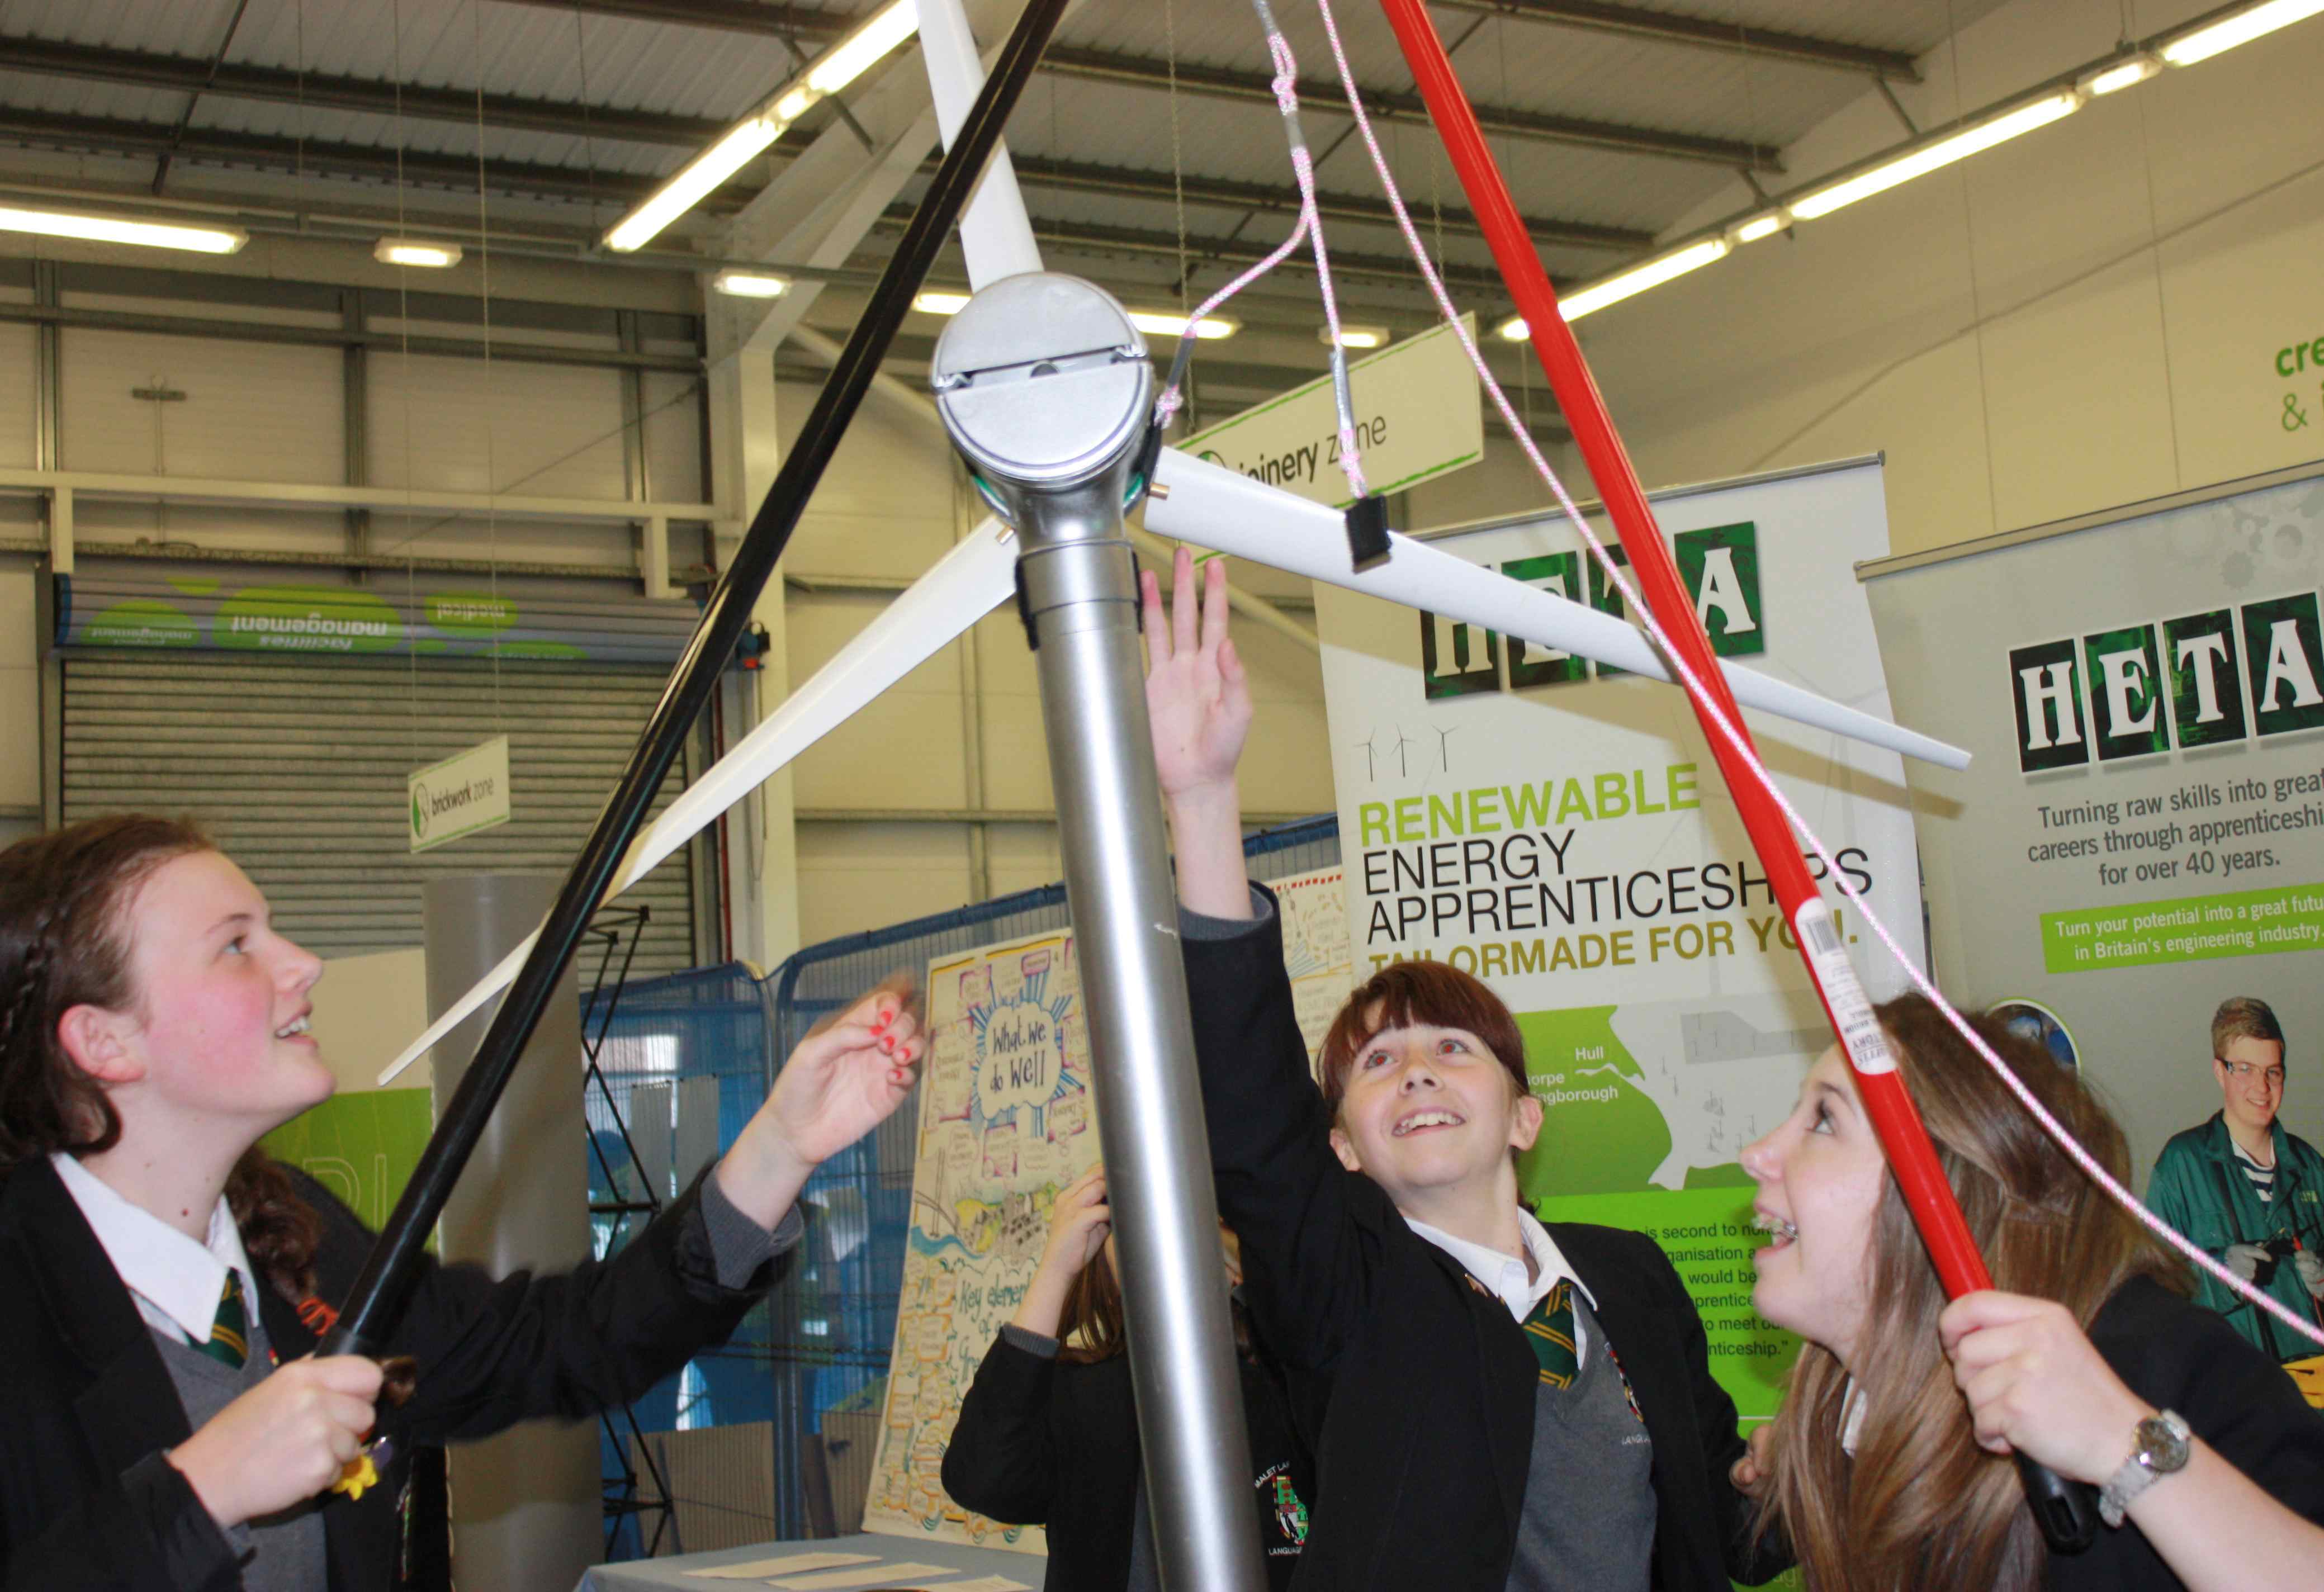 UK: ‘Champions for Wind’ Gets into Teesside Schools